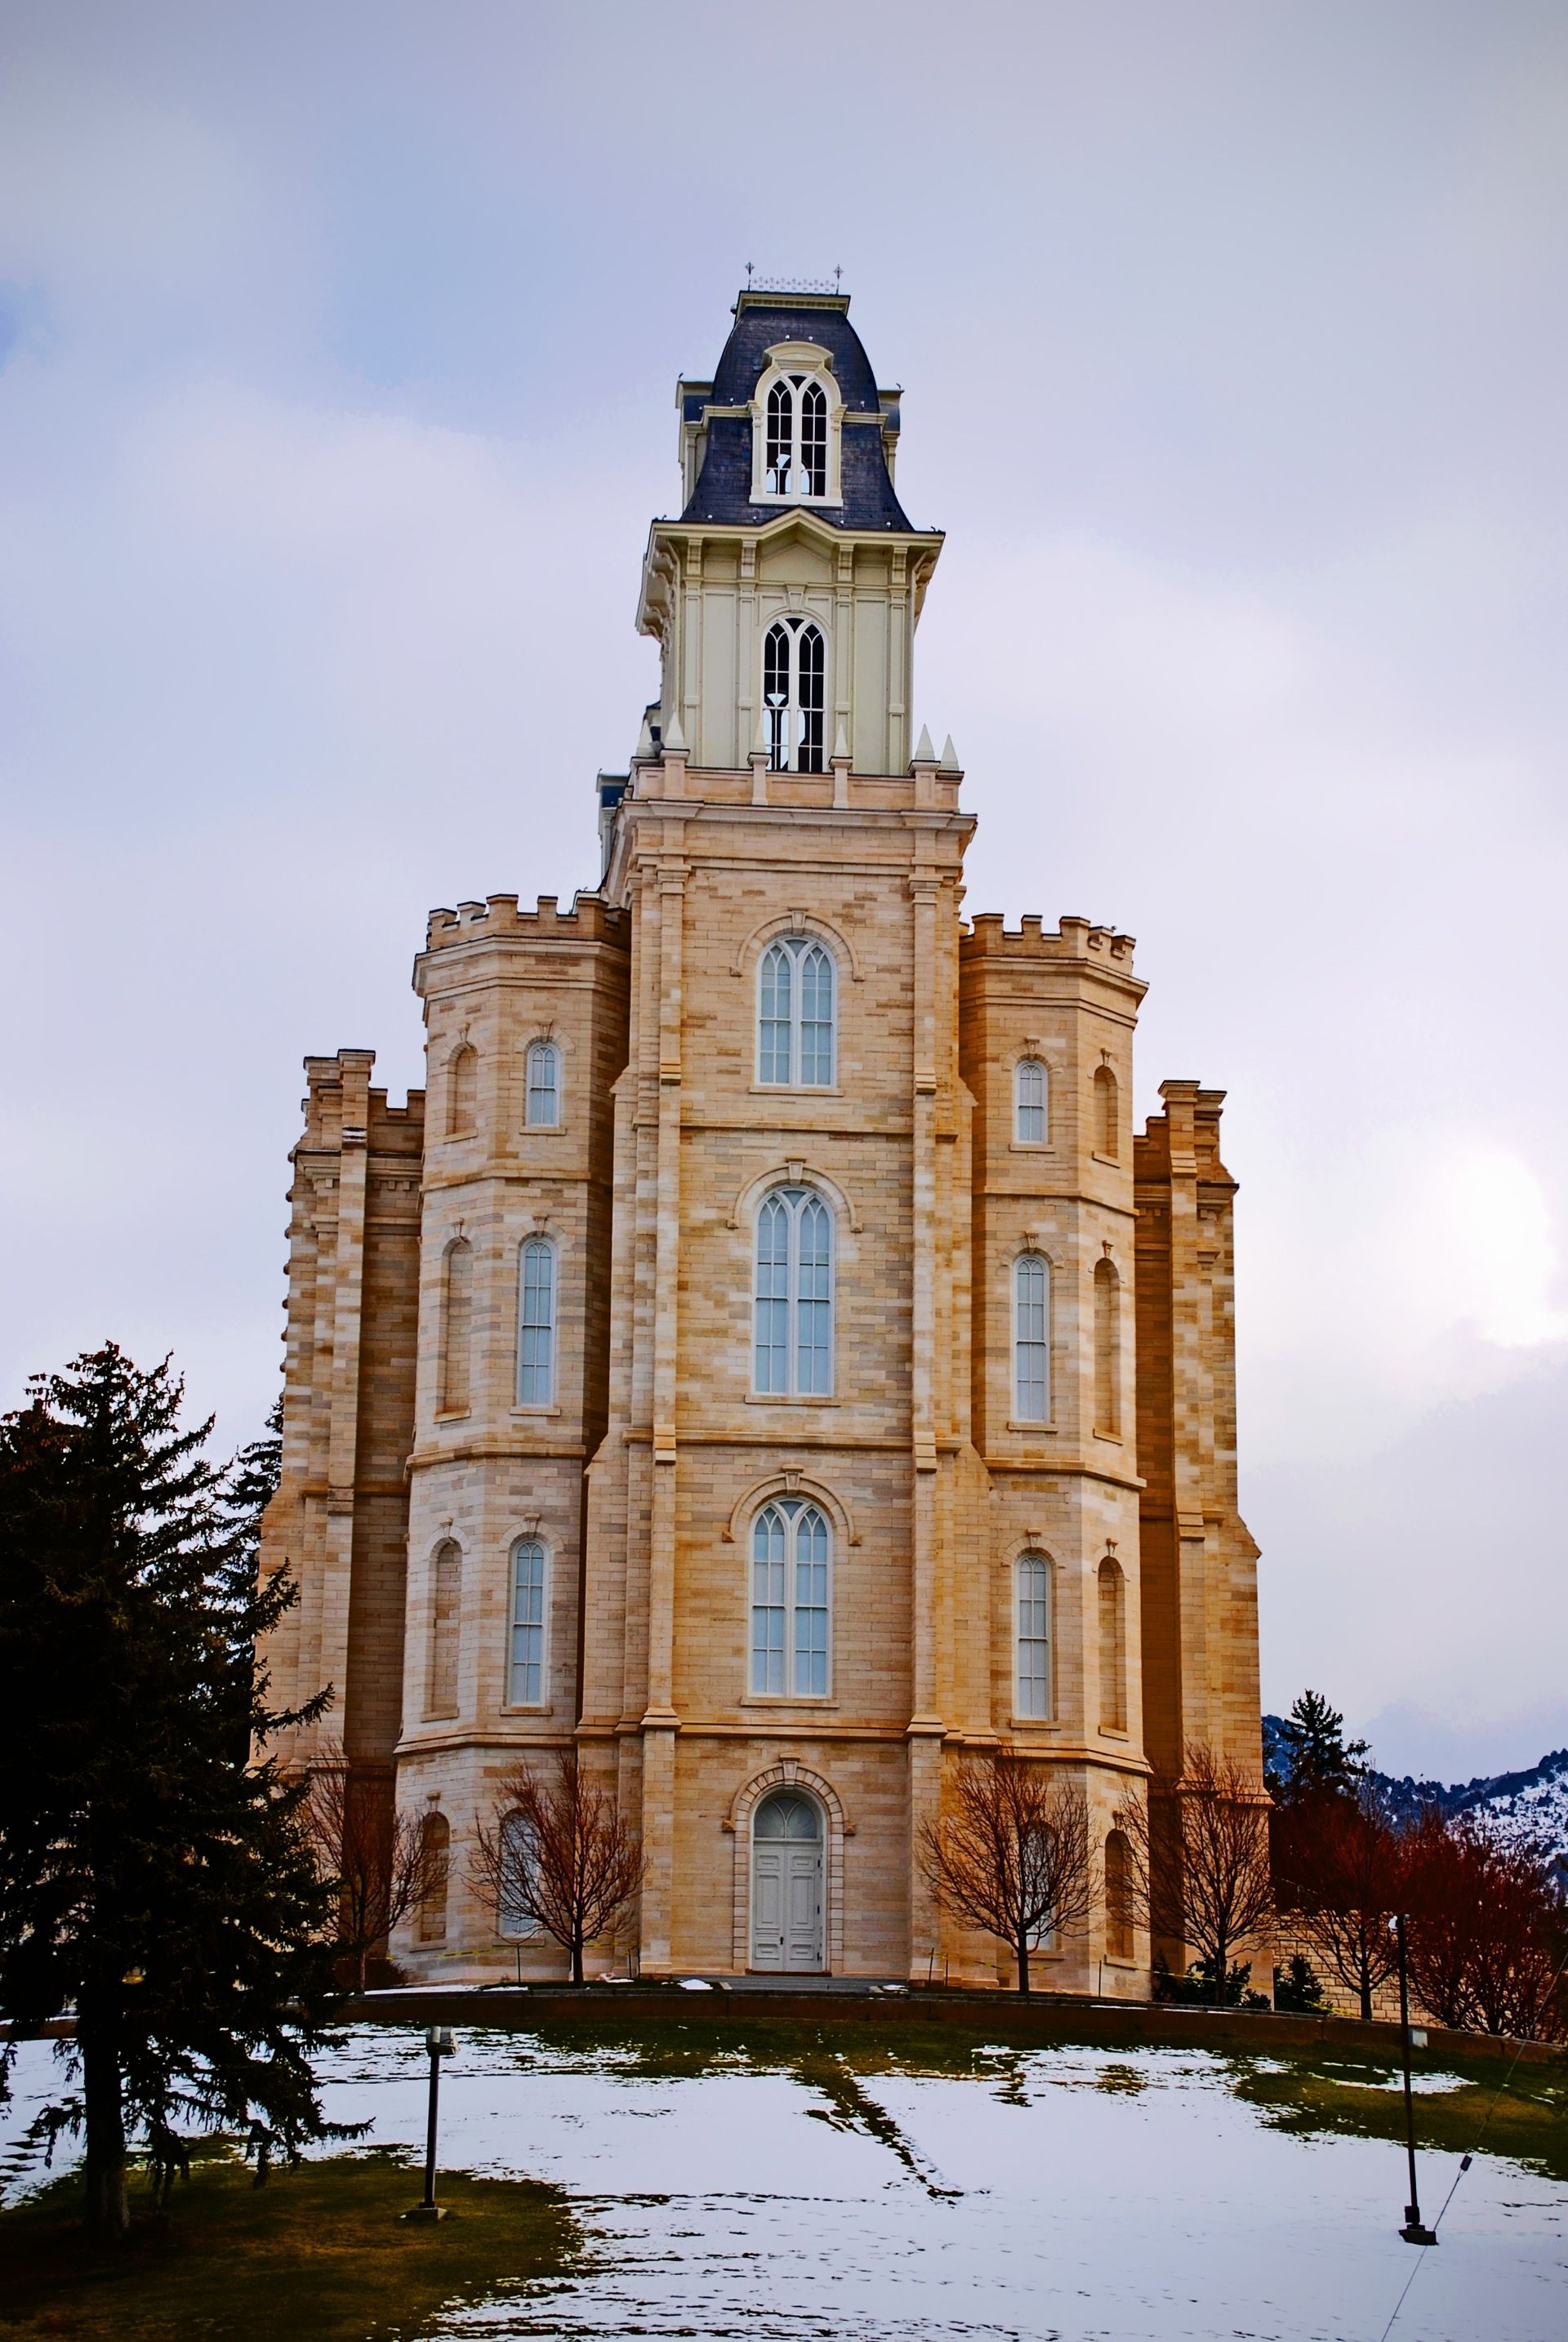 The Manti Utah Temple in the winter, including the west view.